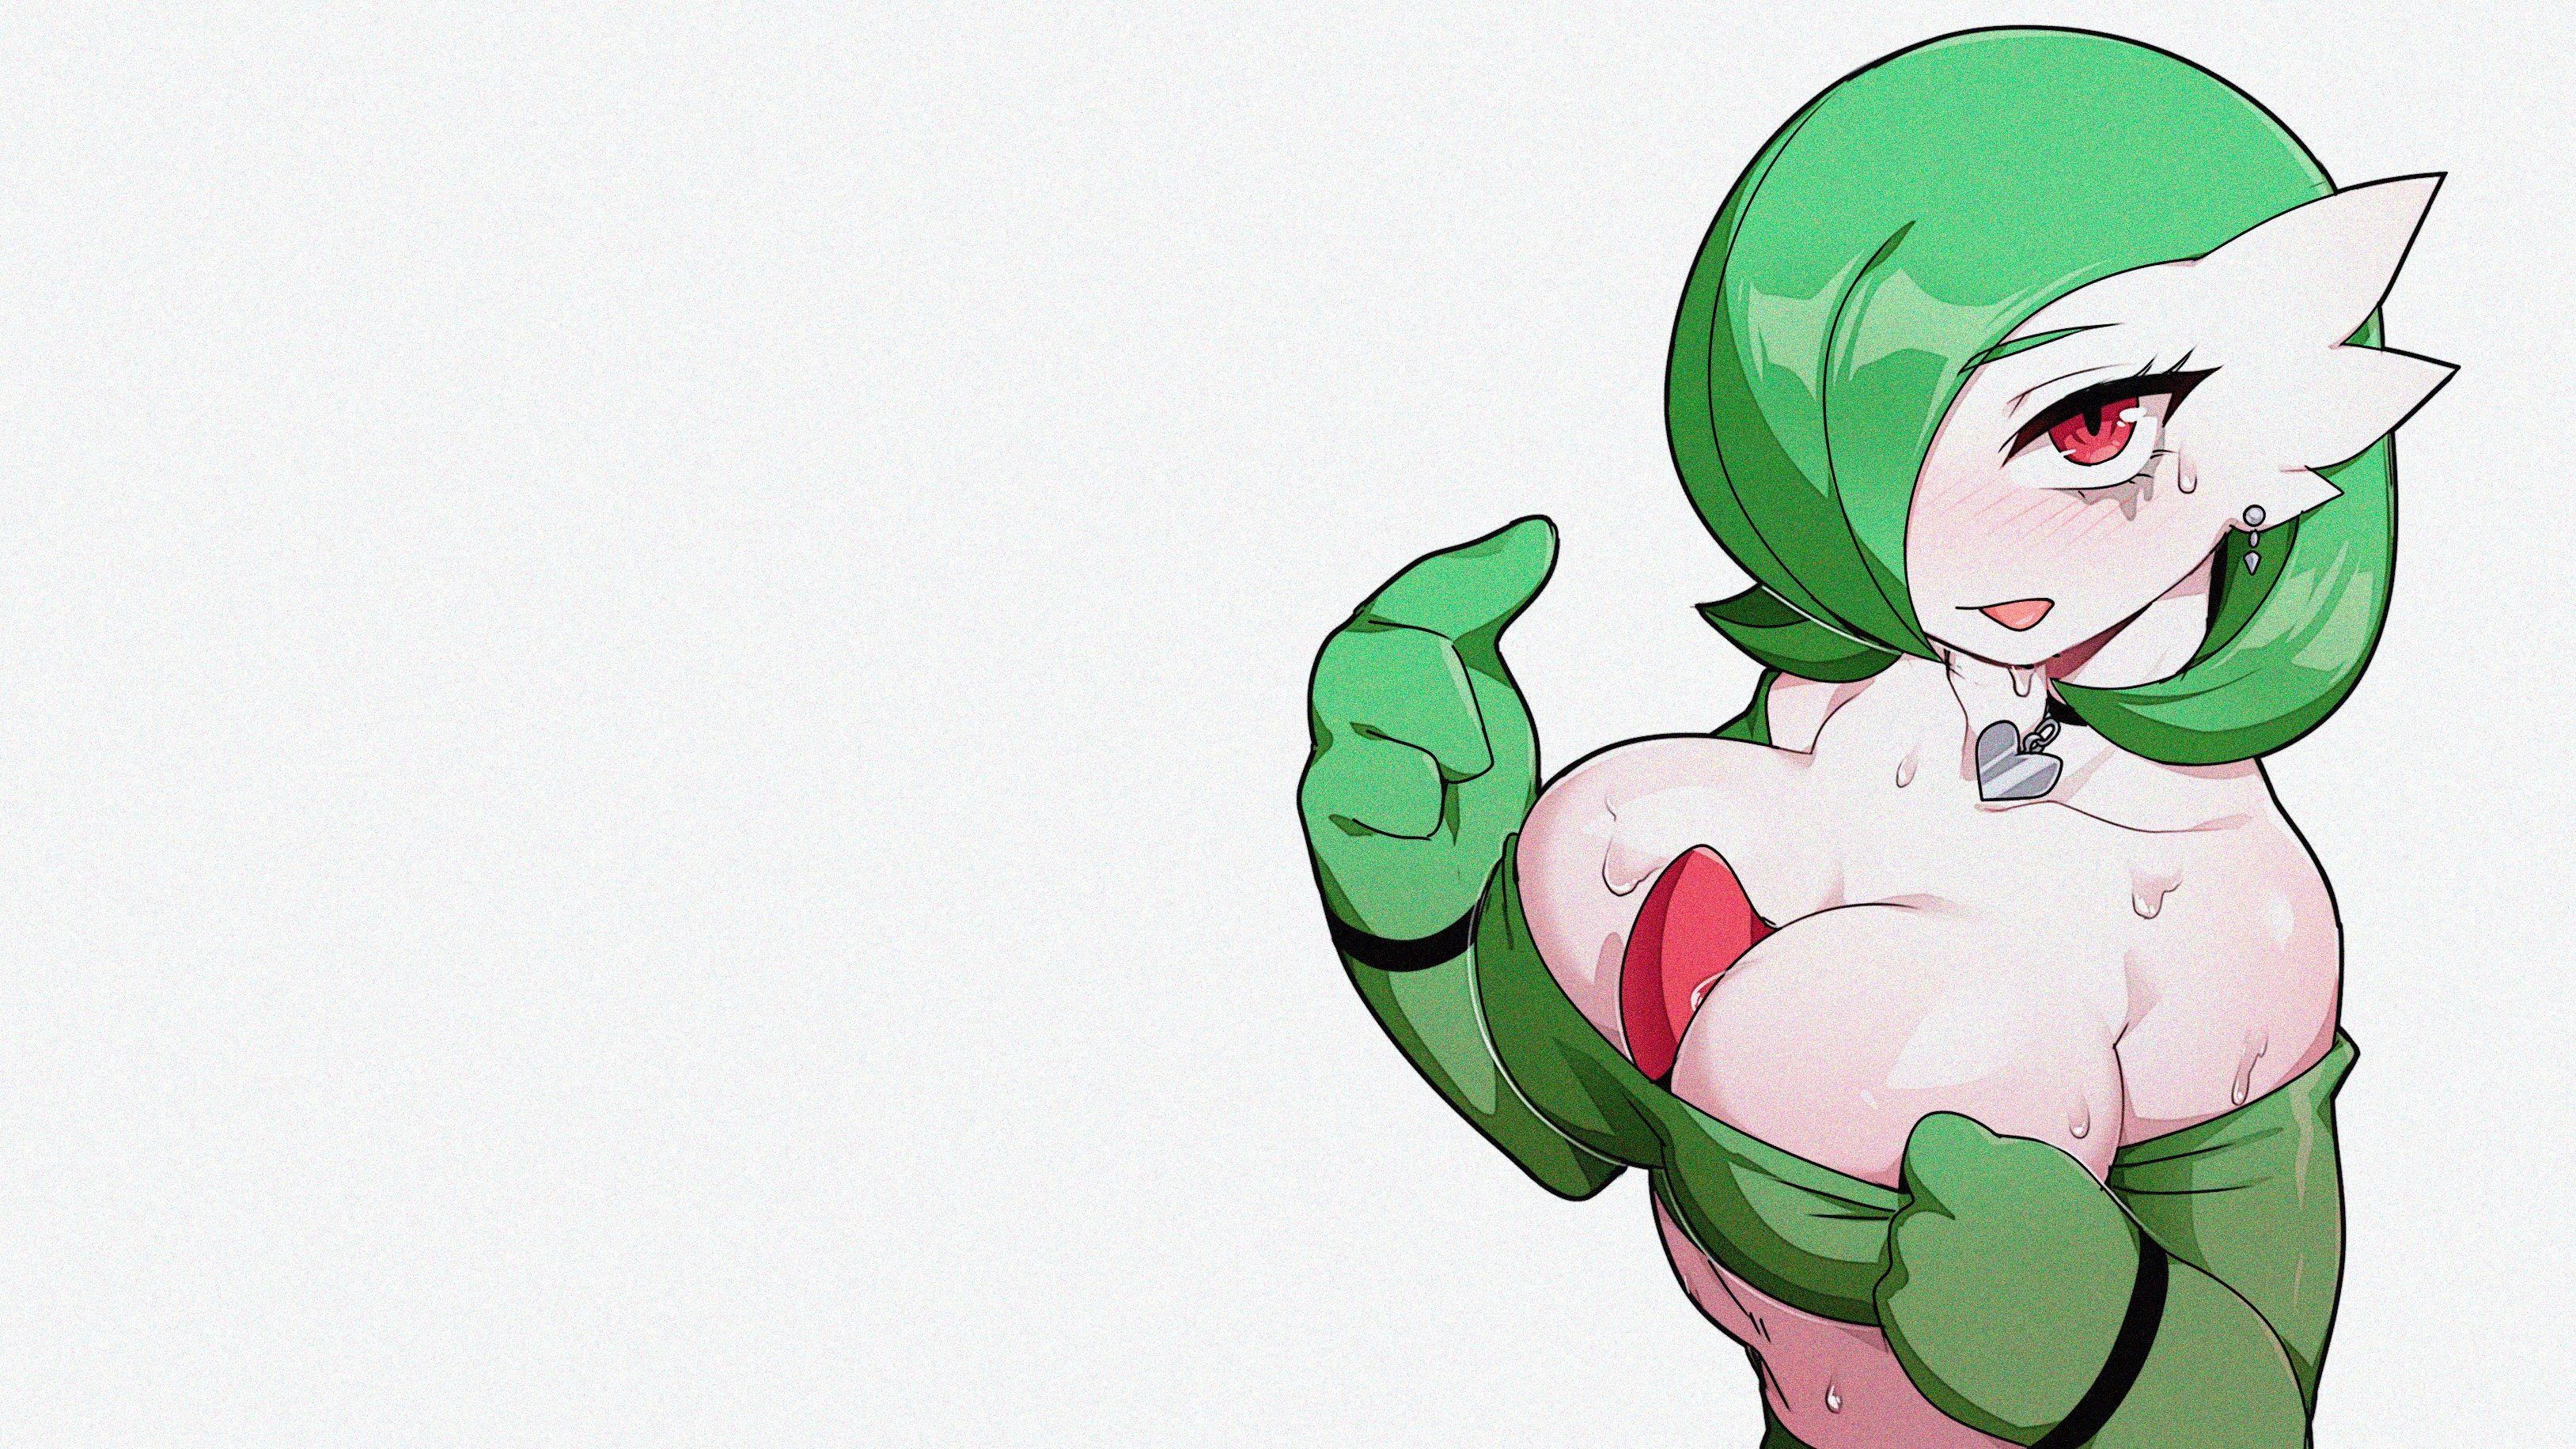 Anime 3256x1832 anime anime girls Pokémon Gardevoir green hair red eyes makeup crying smudged makeup boobs big boobs tongue out choker earring simple background white background Mini hair over one eye blushing minimalism